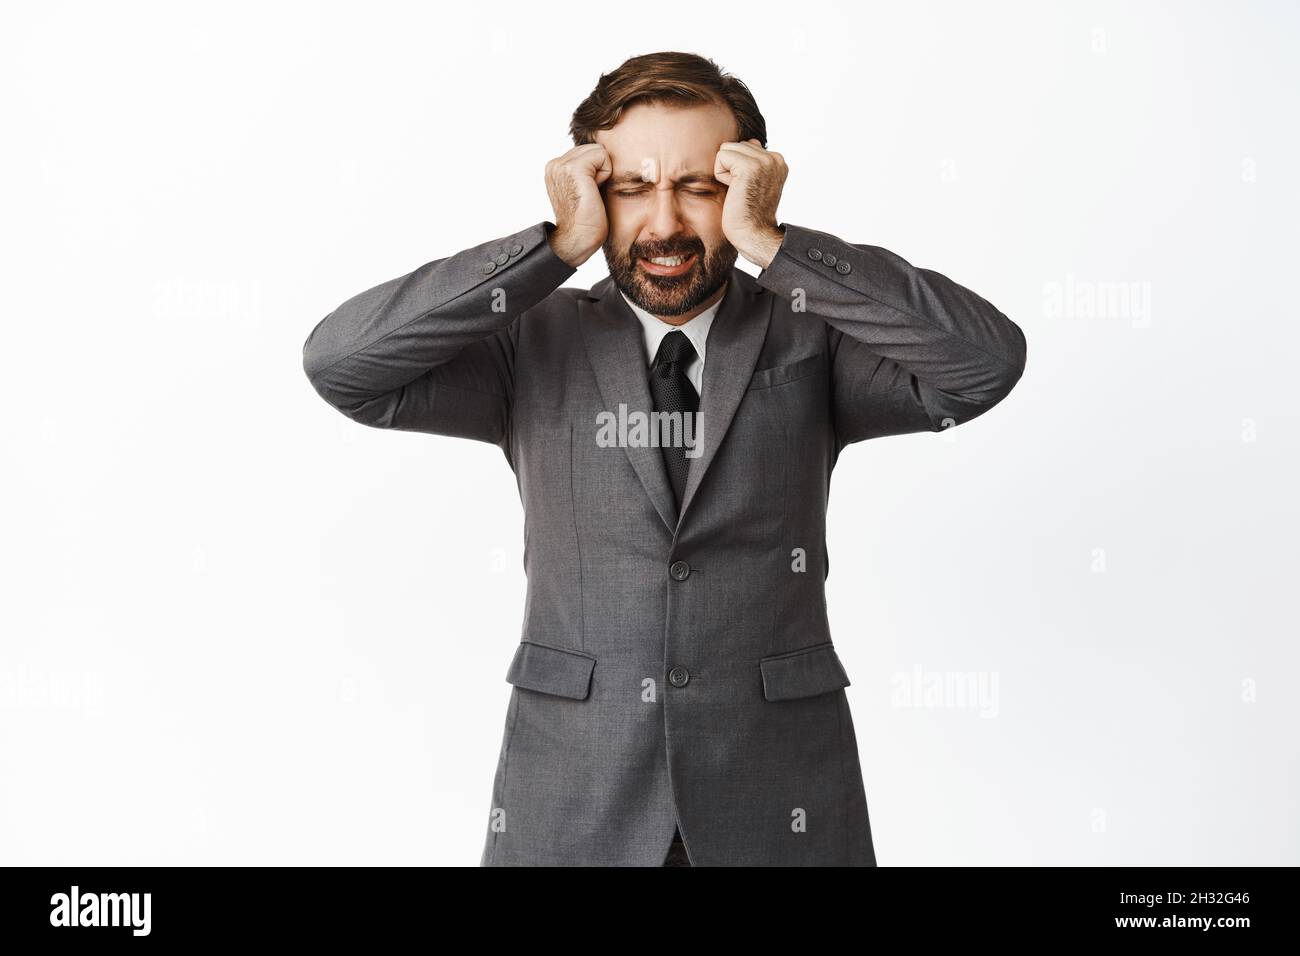 Distressed and tensed corporate man holding hands on head and grimacing, painful headache, frustrated about losing, standing against white background Stock Photo